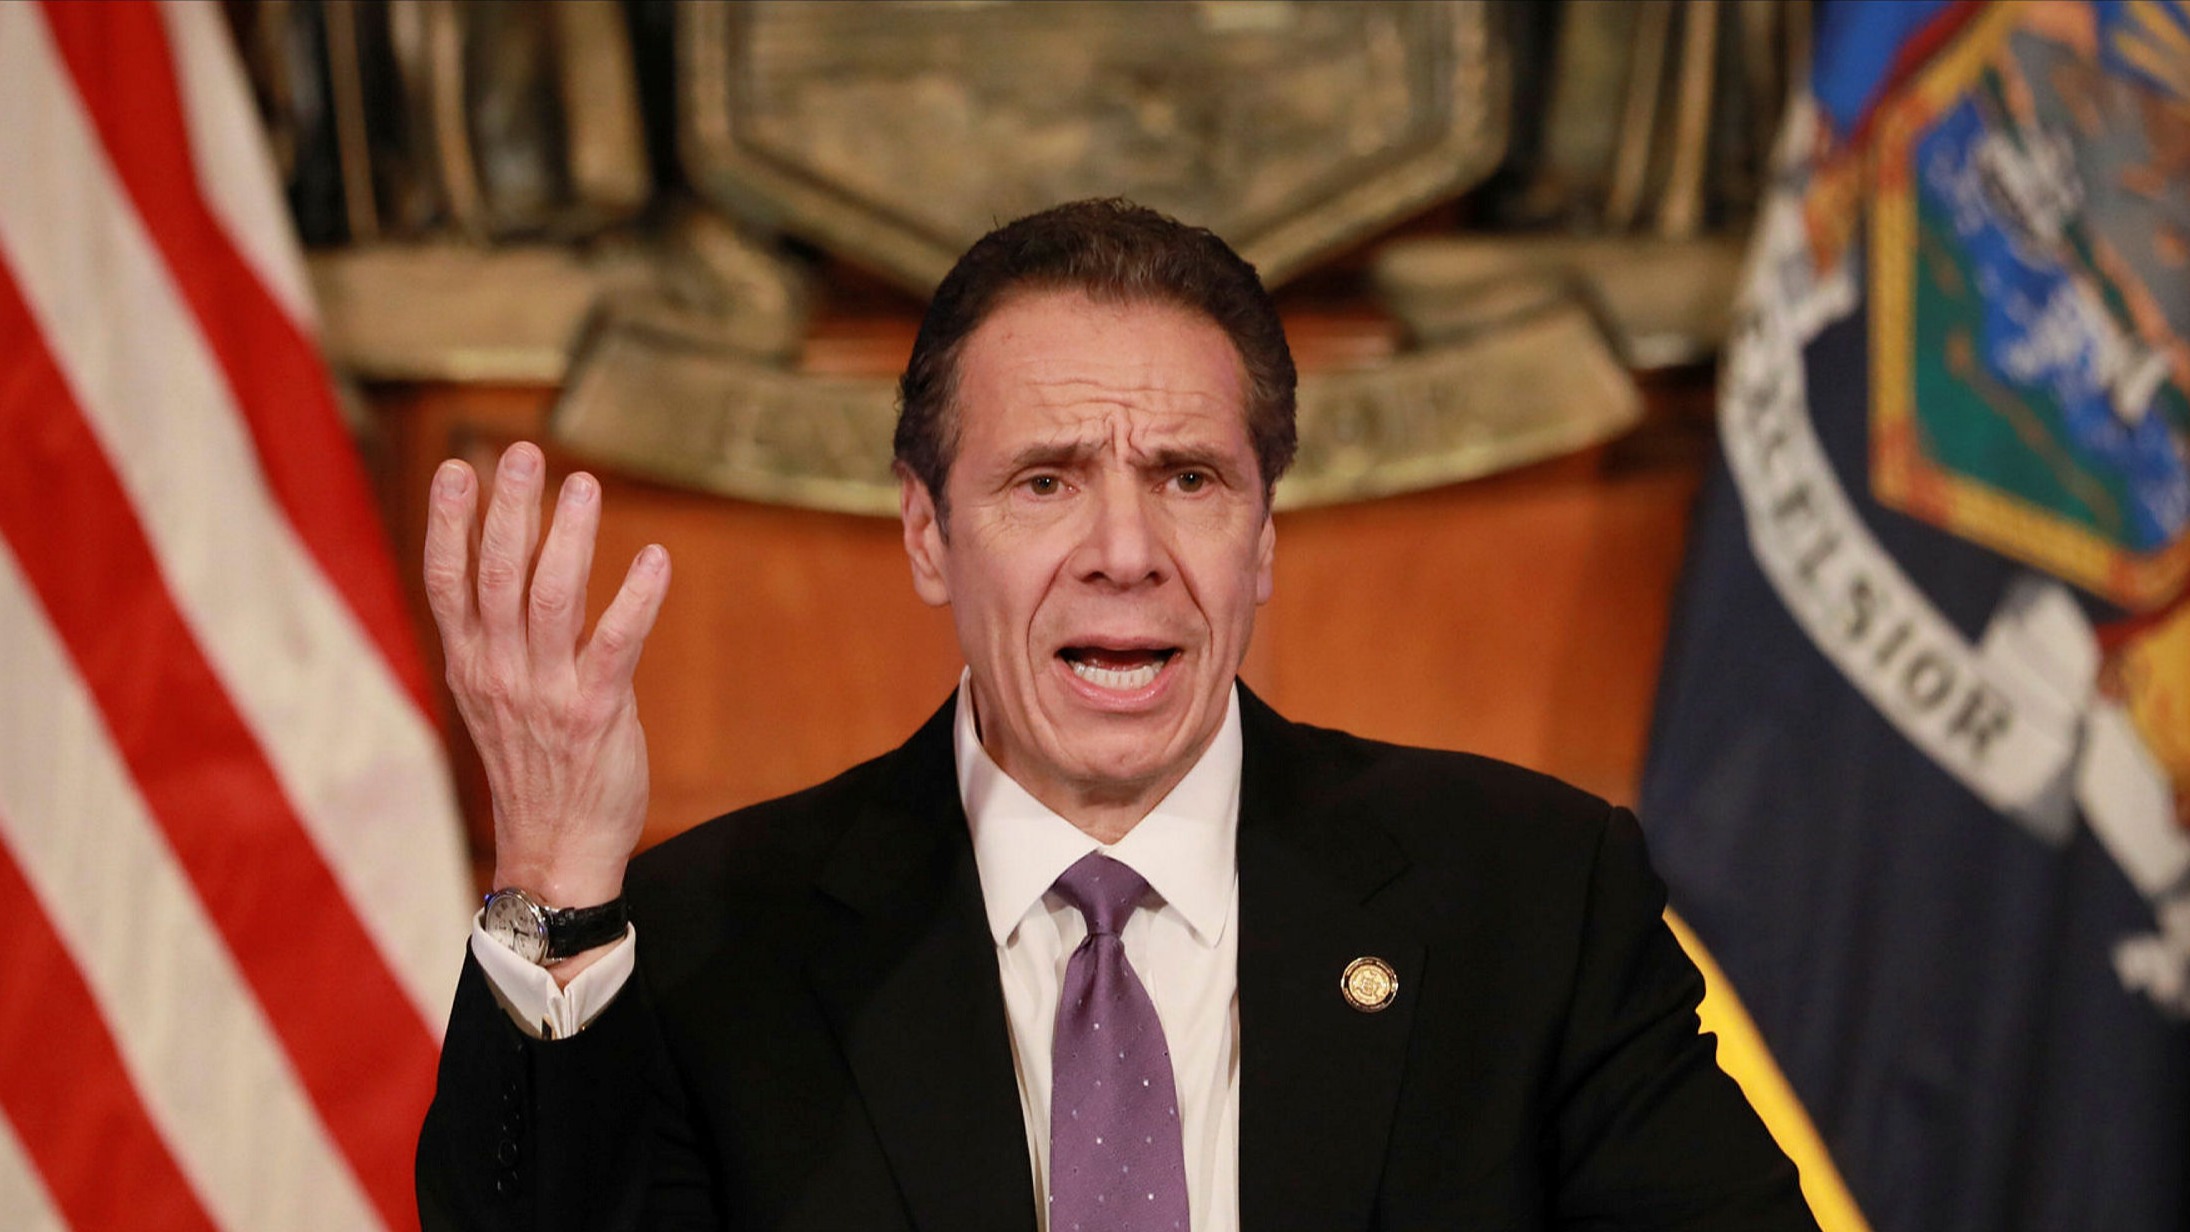 Frontlist | Andrew Cuomo entered best sellers list by selling11,800 copies